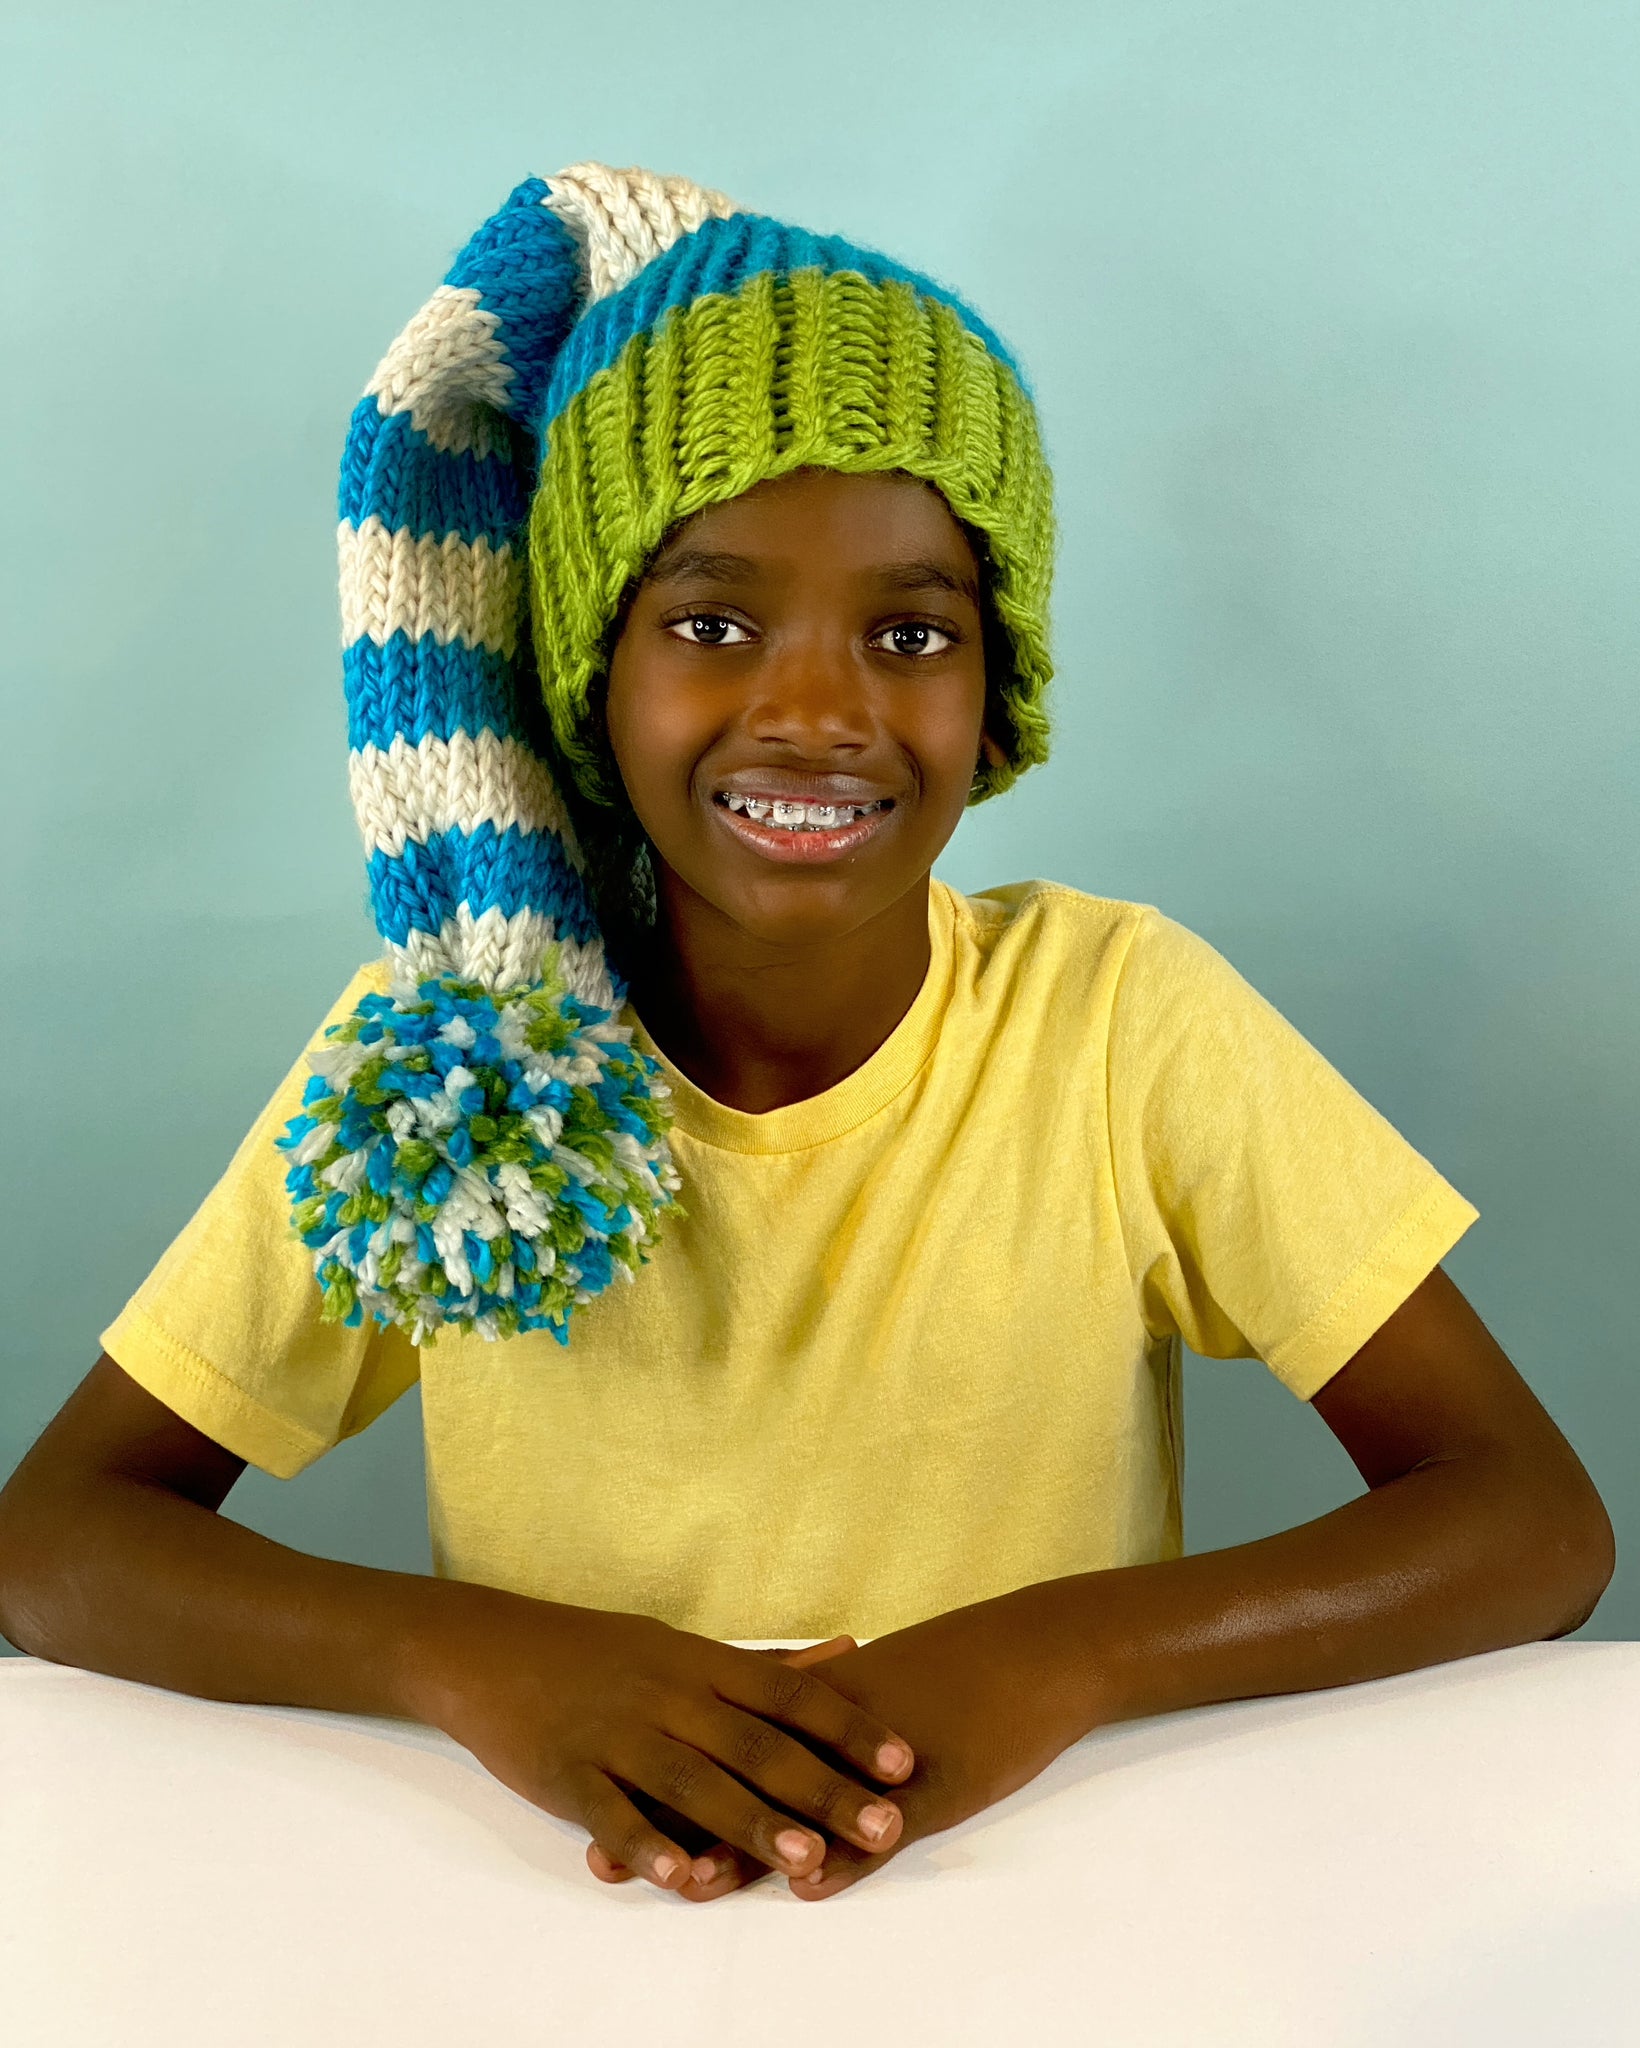 Quick Knit Loom for Kids' Hats & Bags